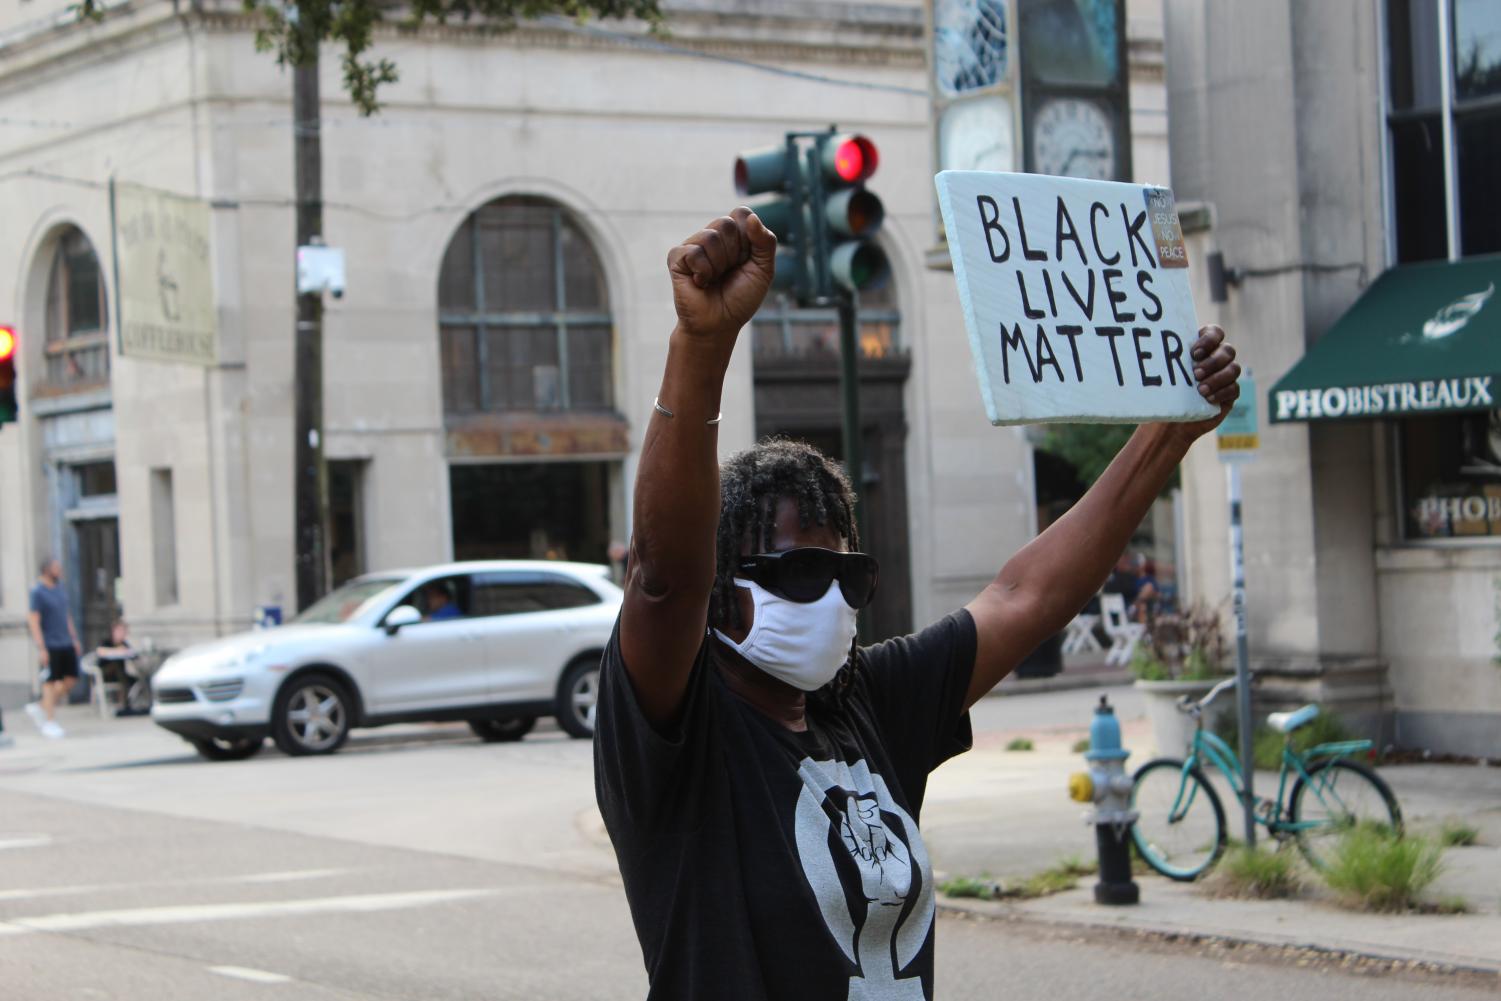 A Protestor on South Carrolton holds up a Black lives matter sign.